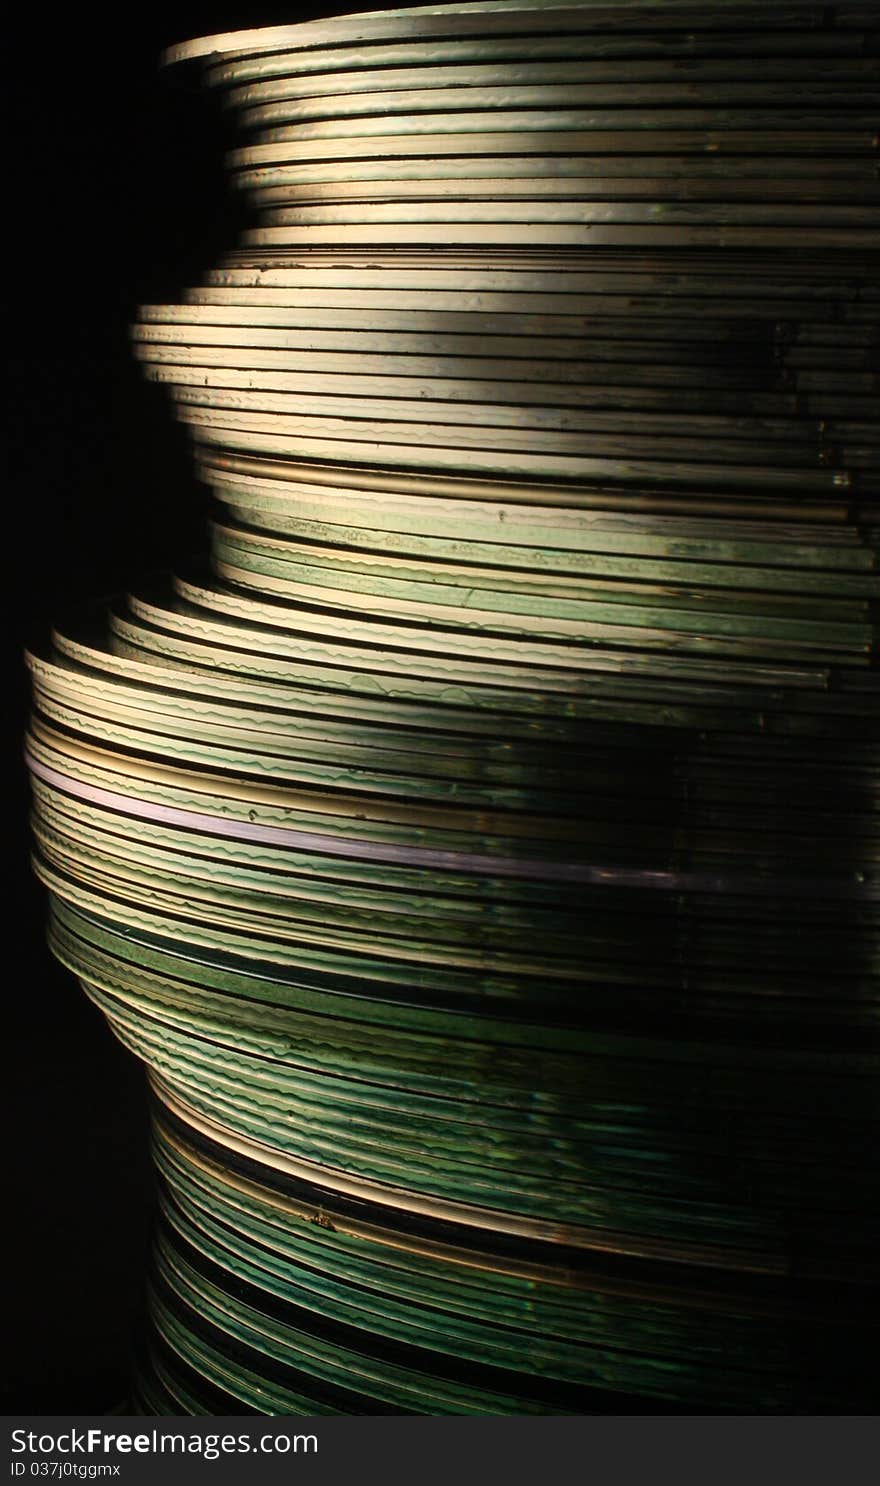 Closeup photo of stacked compact discs against a black background. Closeup photo of stacked compact discs against a black background.